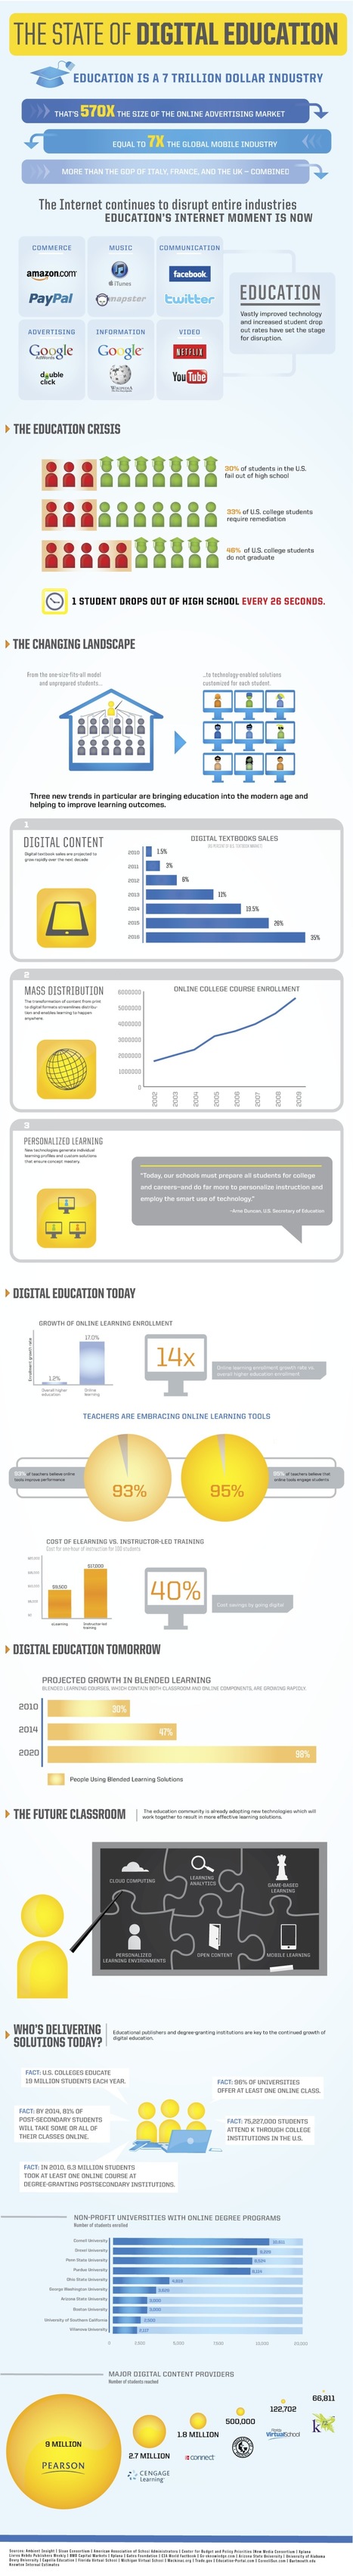 The State of Digital Education Infographic | Technology in Business Today | Scoop.it